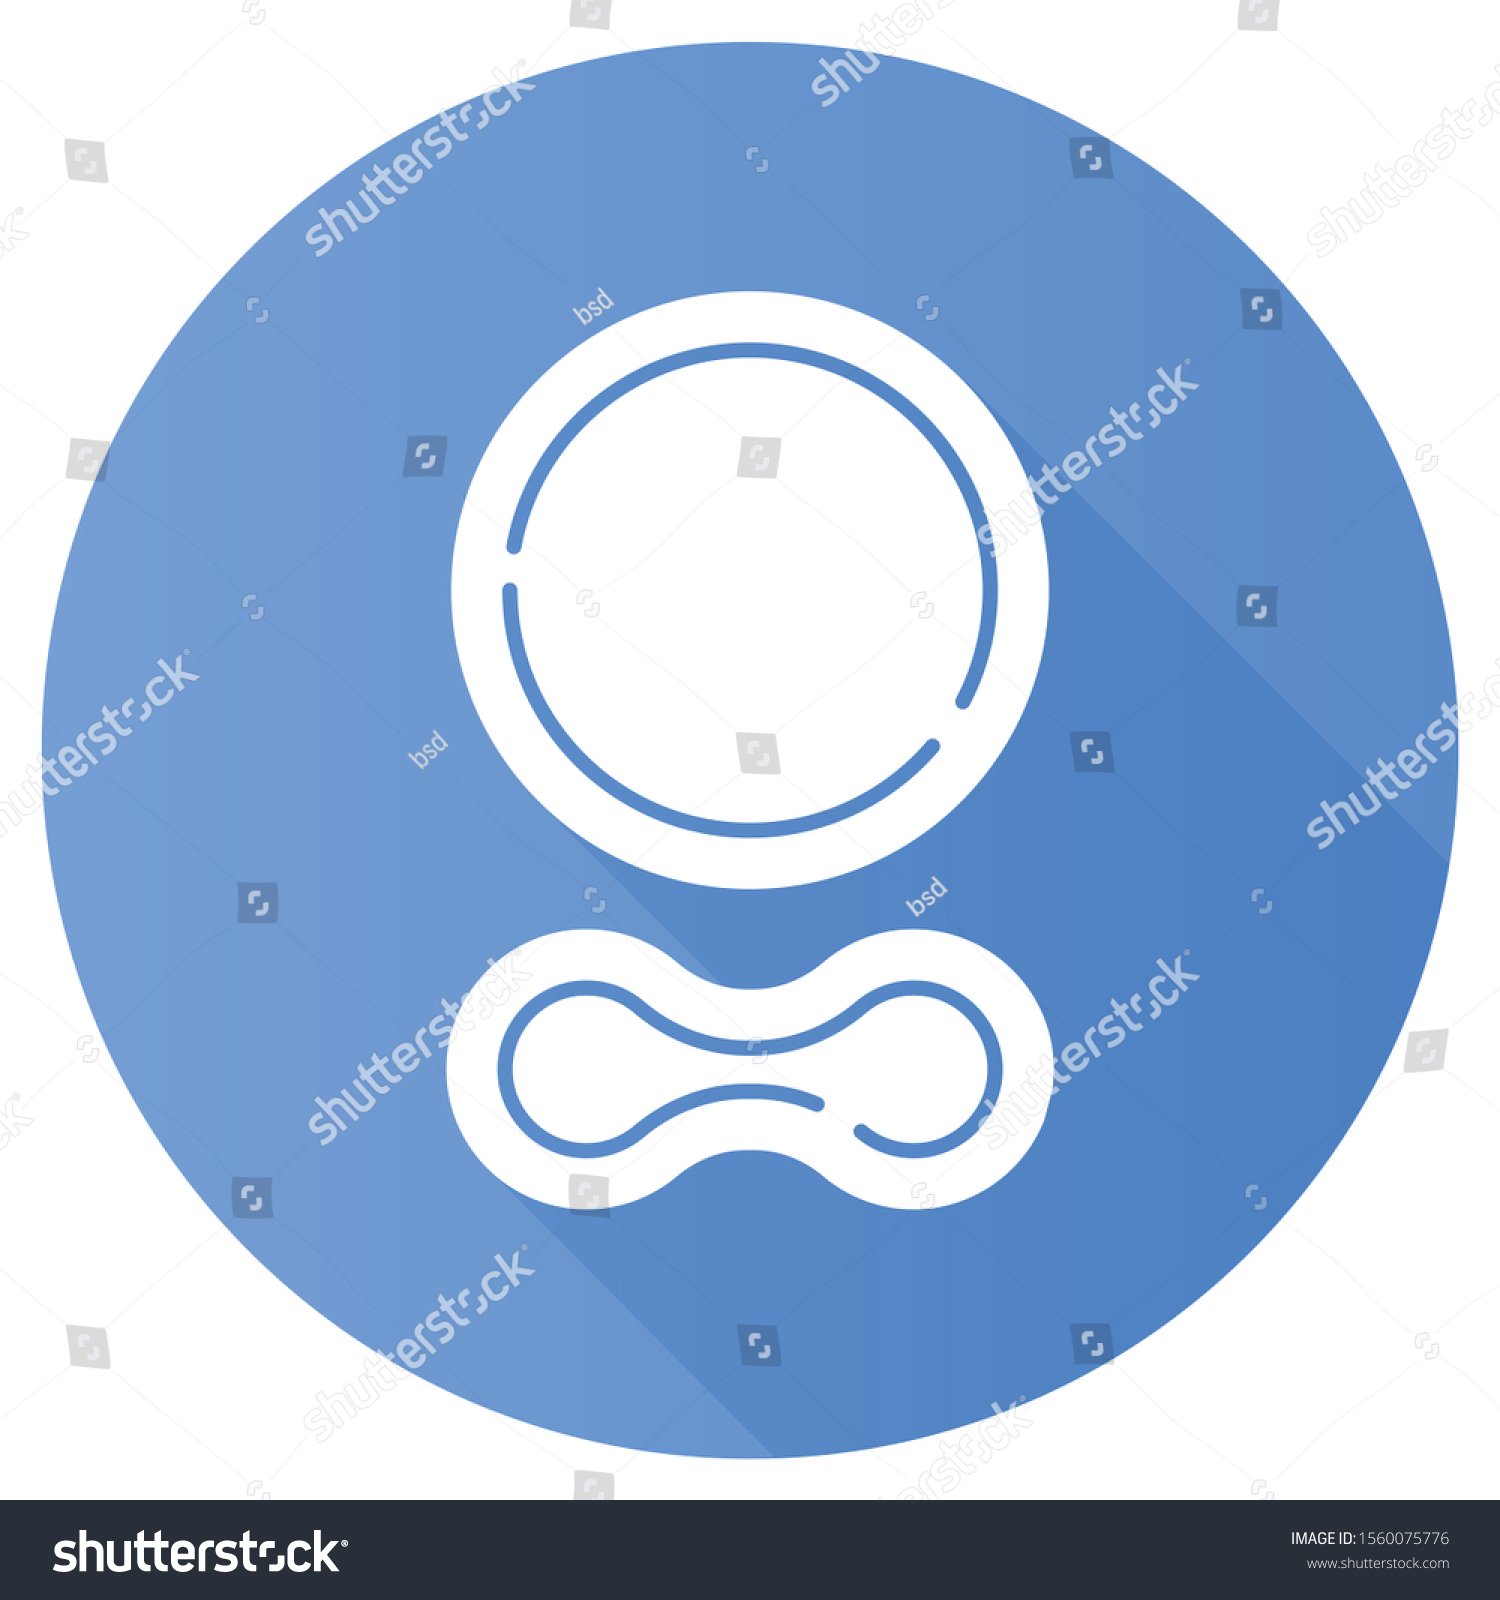 Contraceptive Ring Blue Flat Design Long Stock Vector Royalty Free 1560075776 Shutterstock